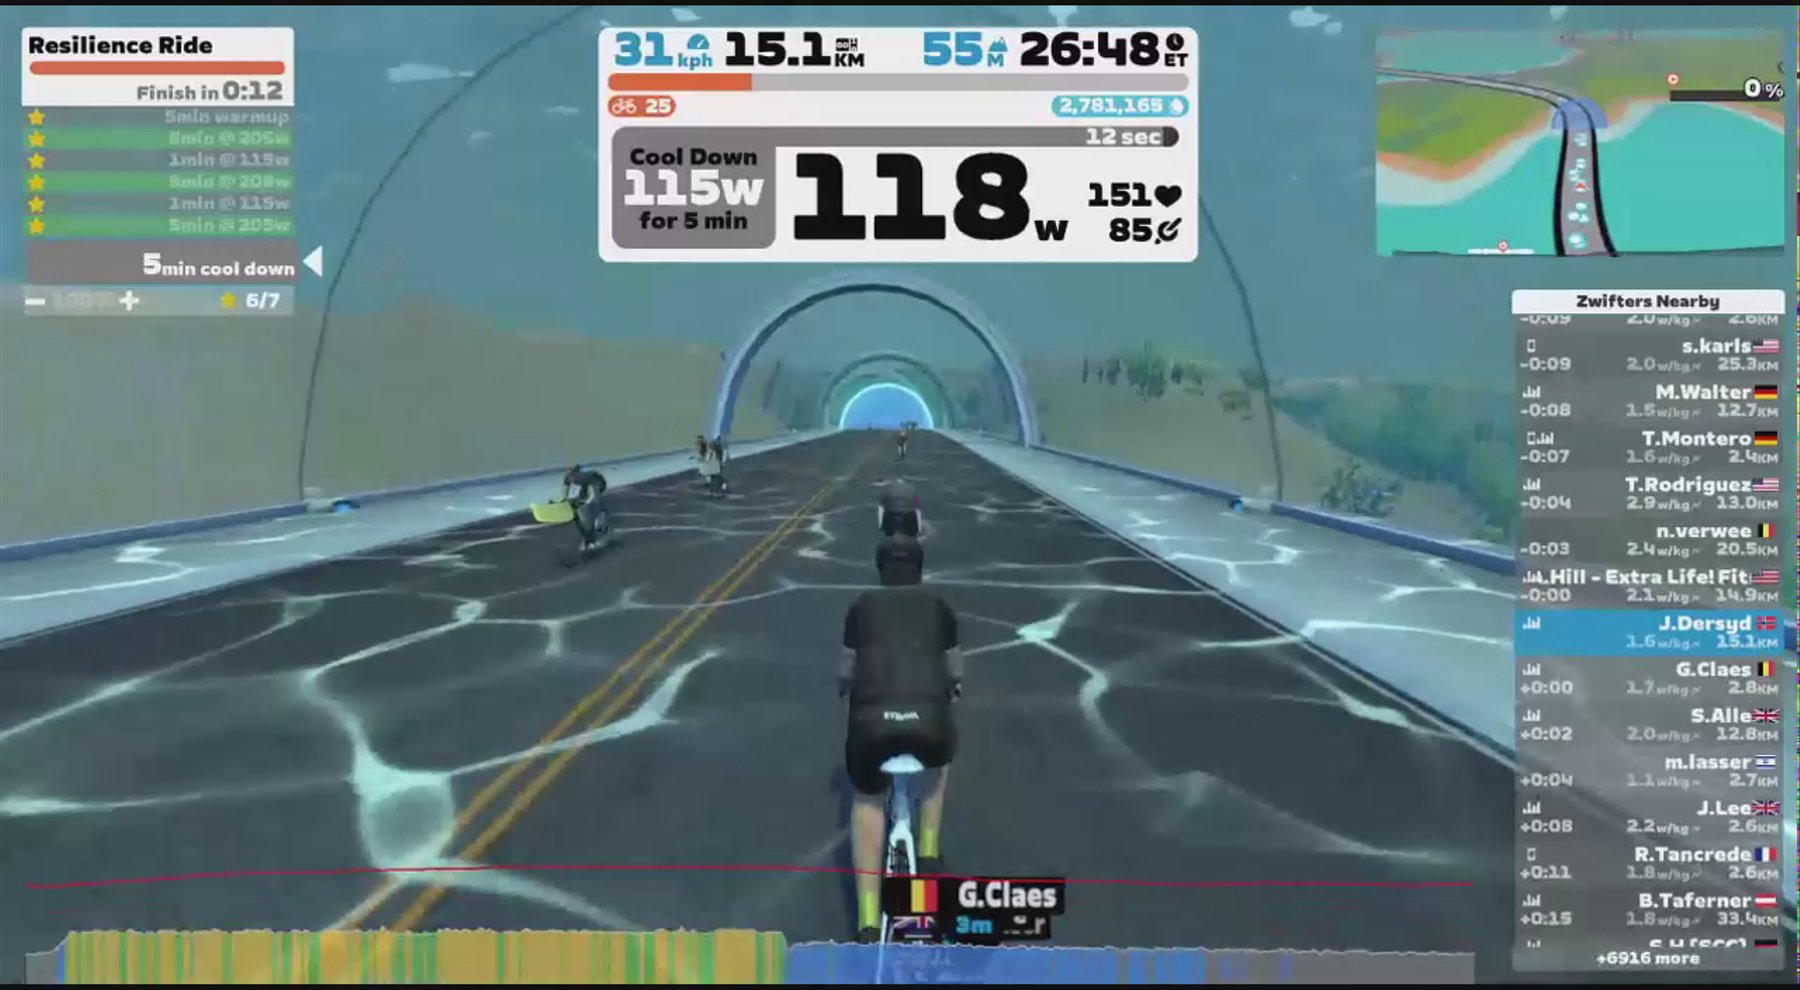 Zwift - Resilience Ride in Watopia